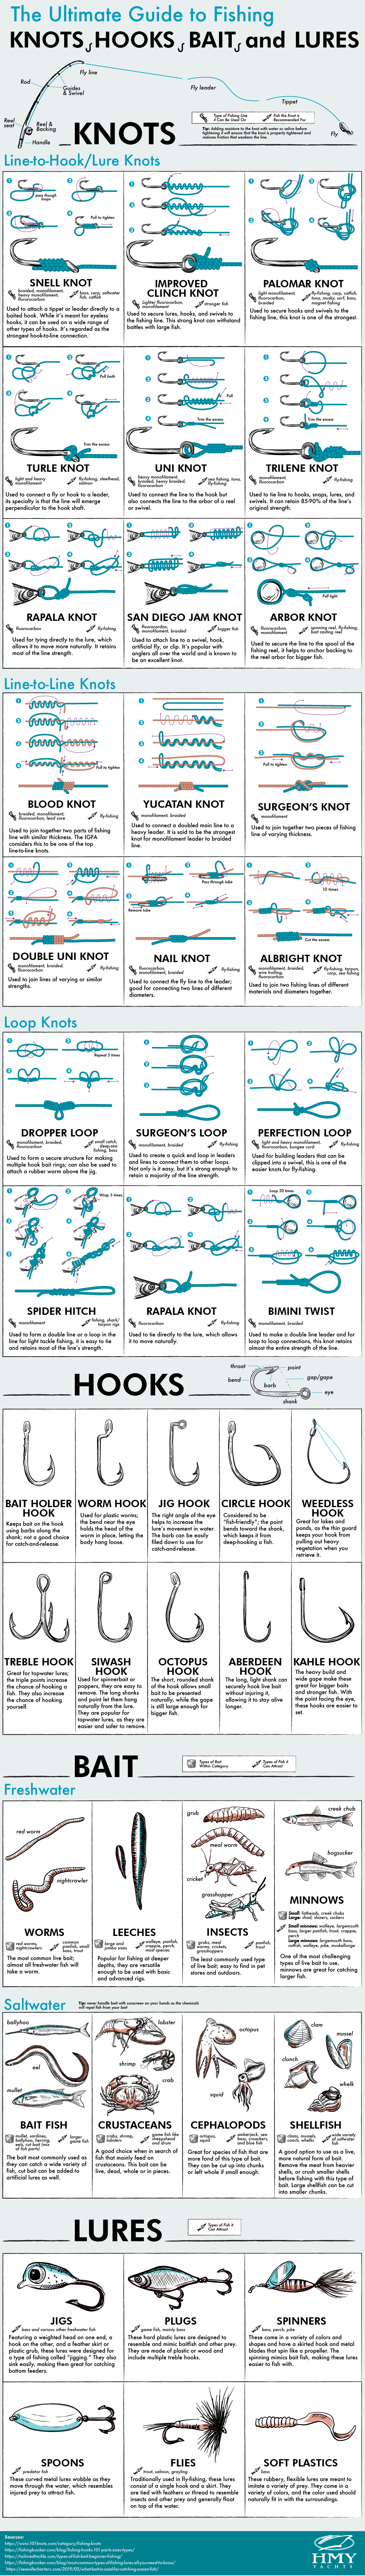 Teh Ultimate Guide to Fishing